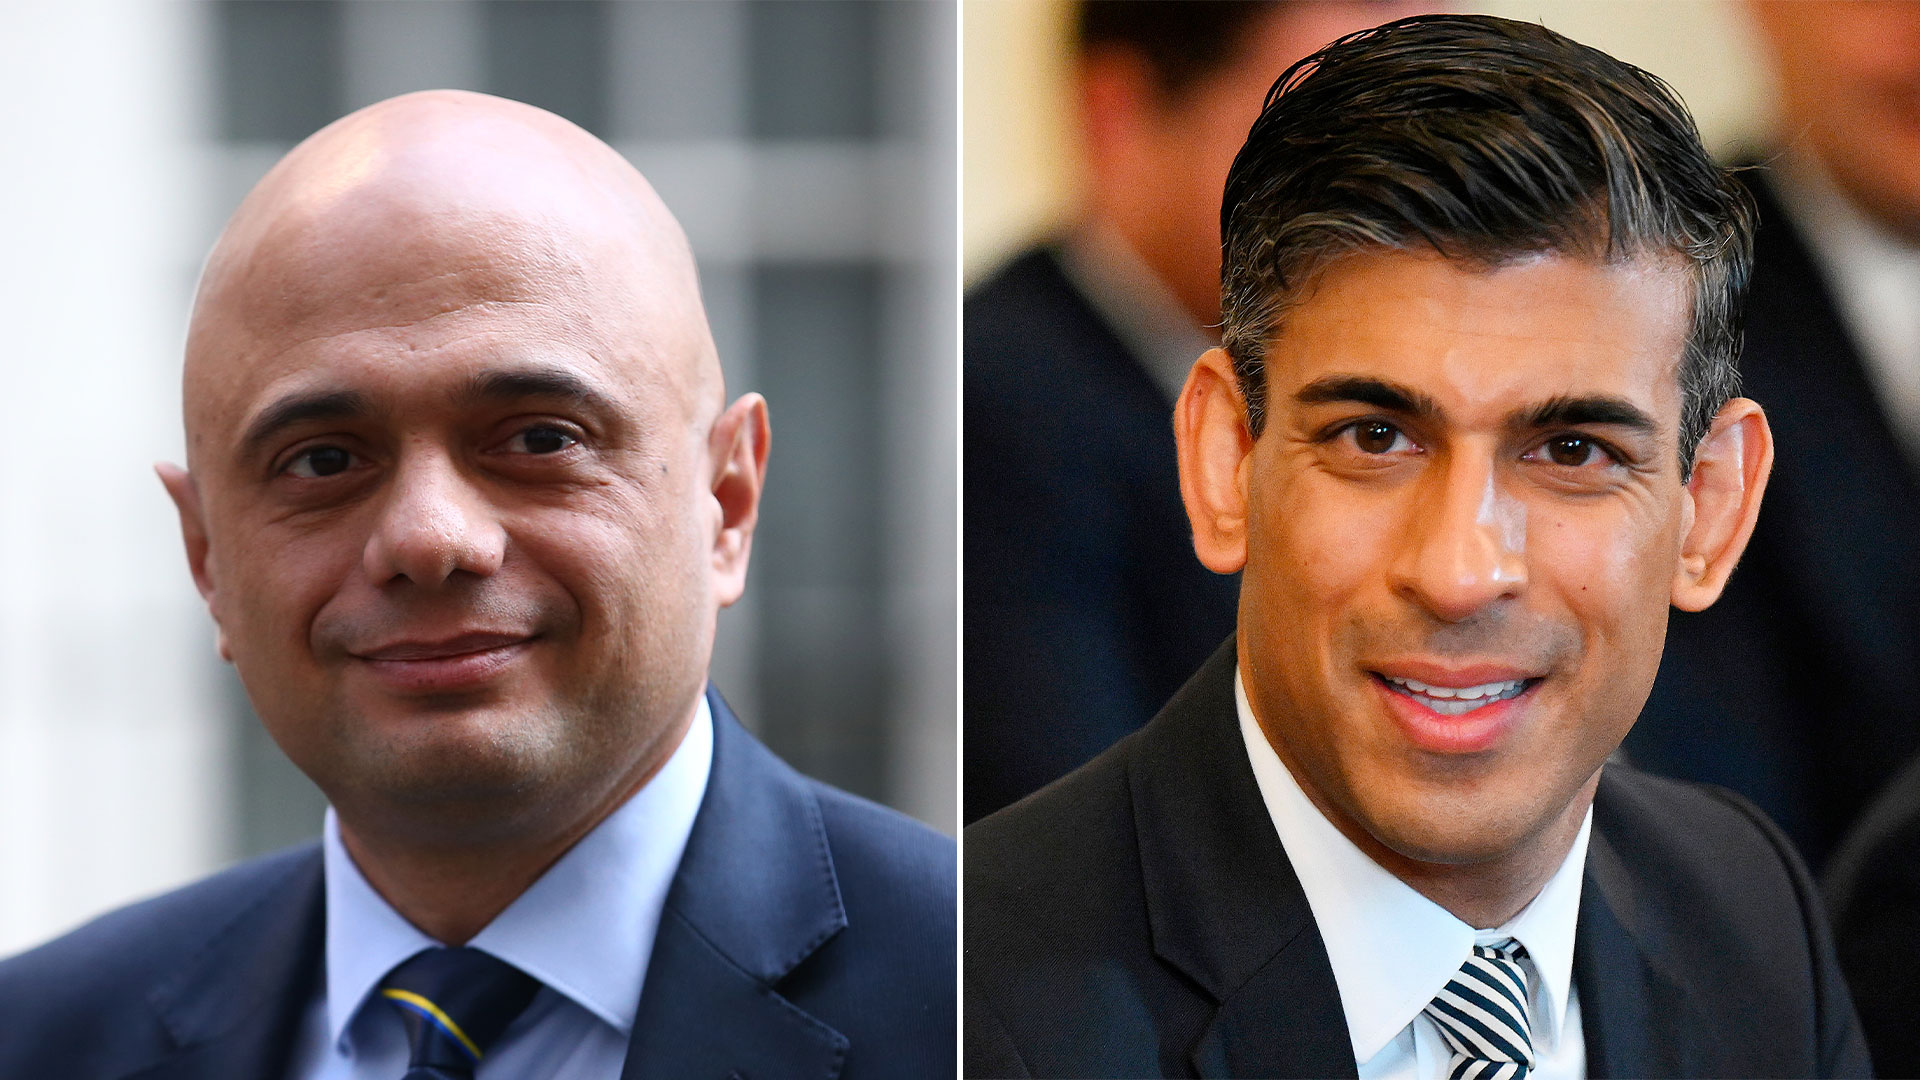 Los ministros de Salud, Sajid Javid (left), and de Finanzas, Rishi Sunak (right), announced their resignations almost at the same time.